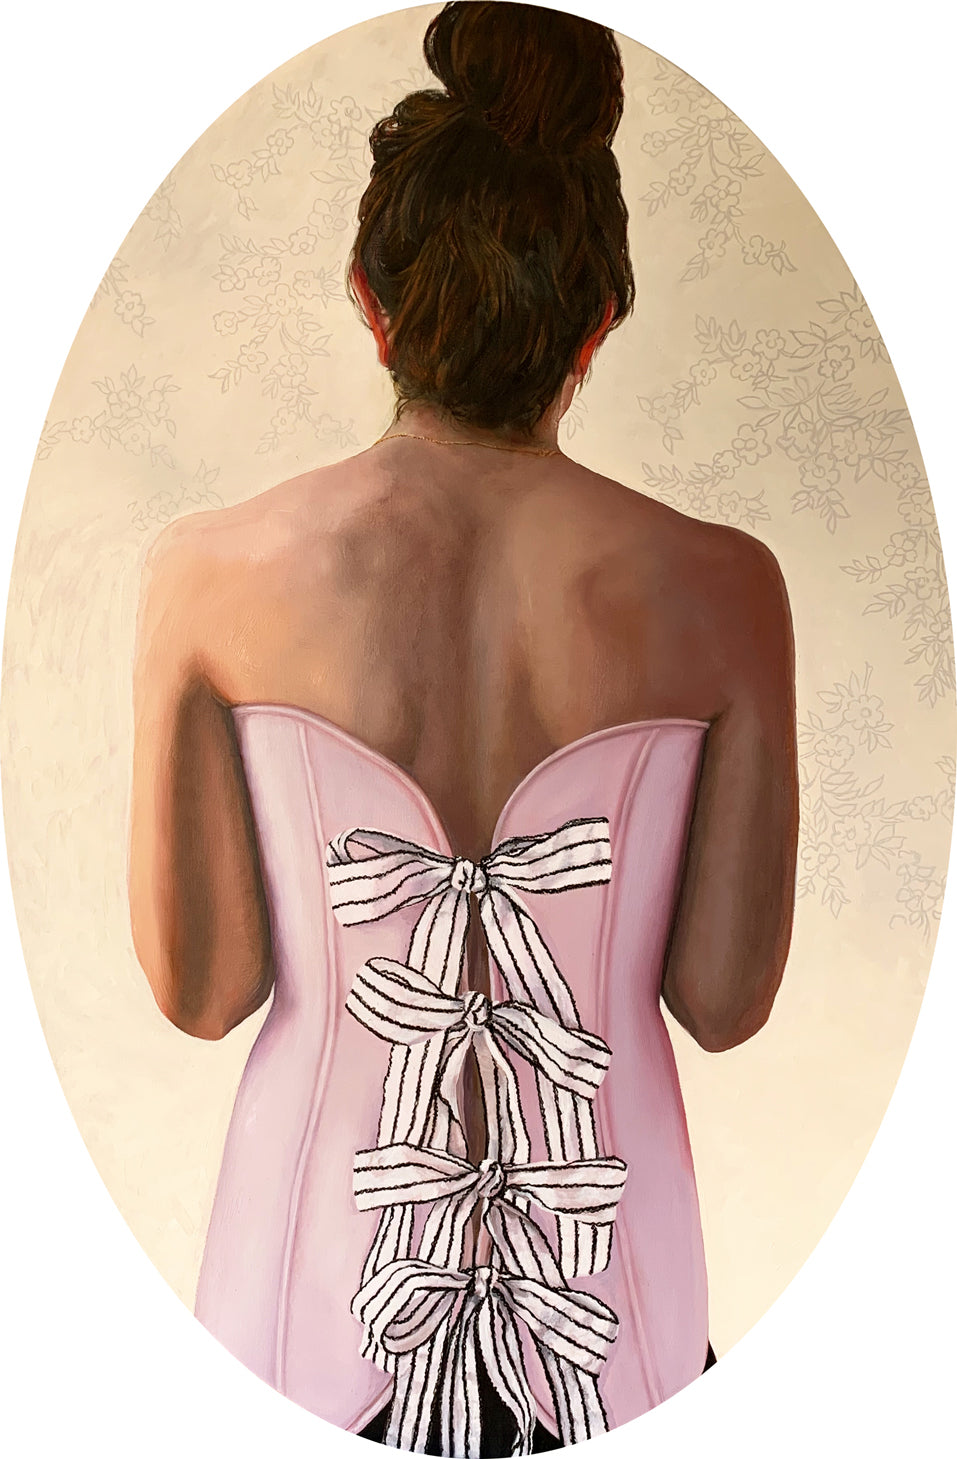 Painting featuring the back of a woman who's wearing a pink corset decorated with bows.